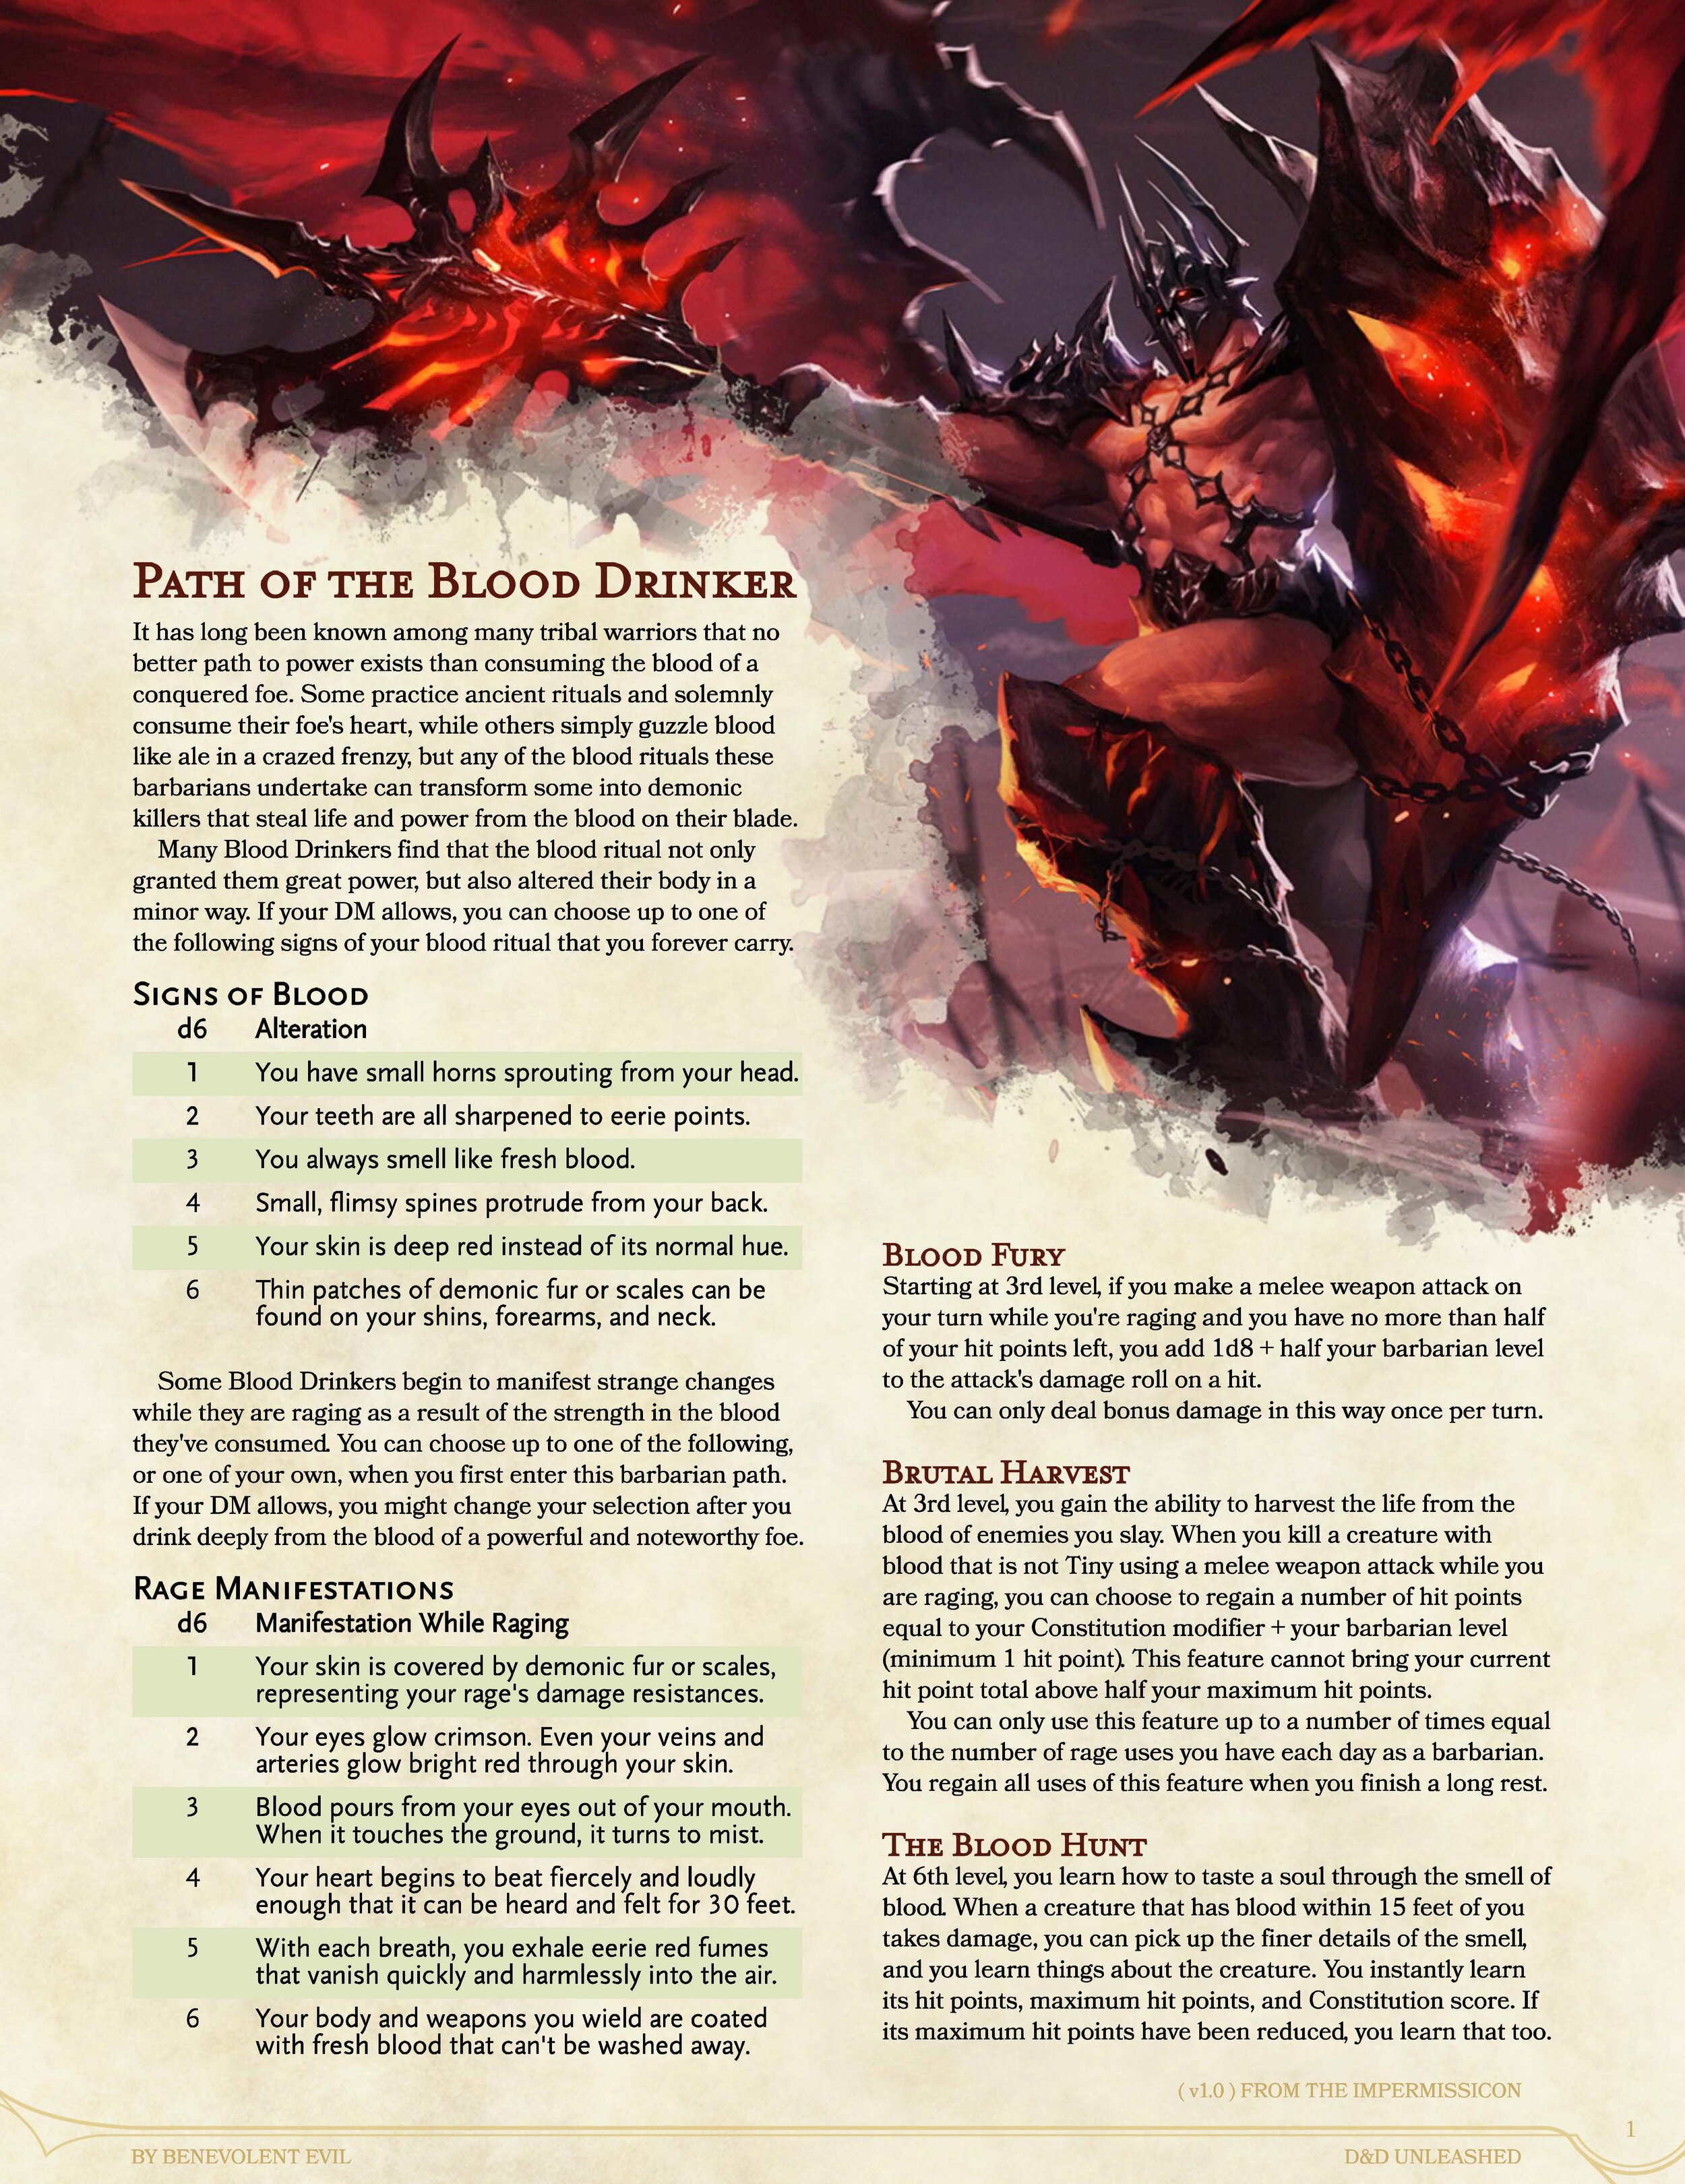 D&D Unleashed - The Blood Drinker Barbarian (1p0)_Page_1.jpg